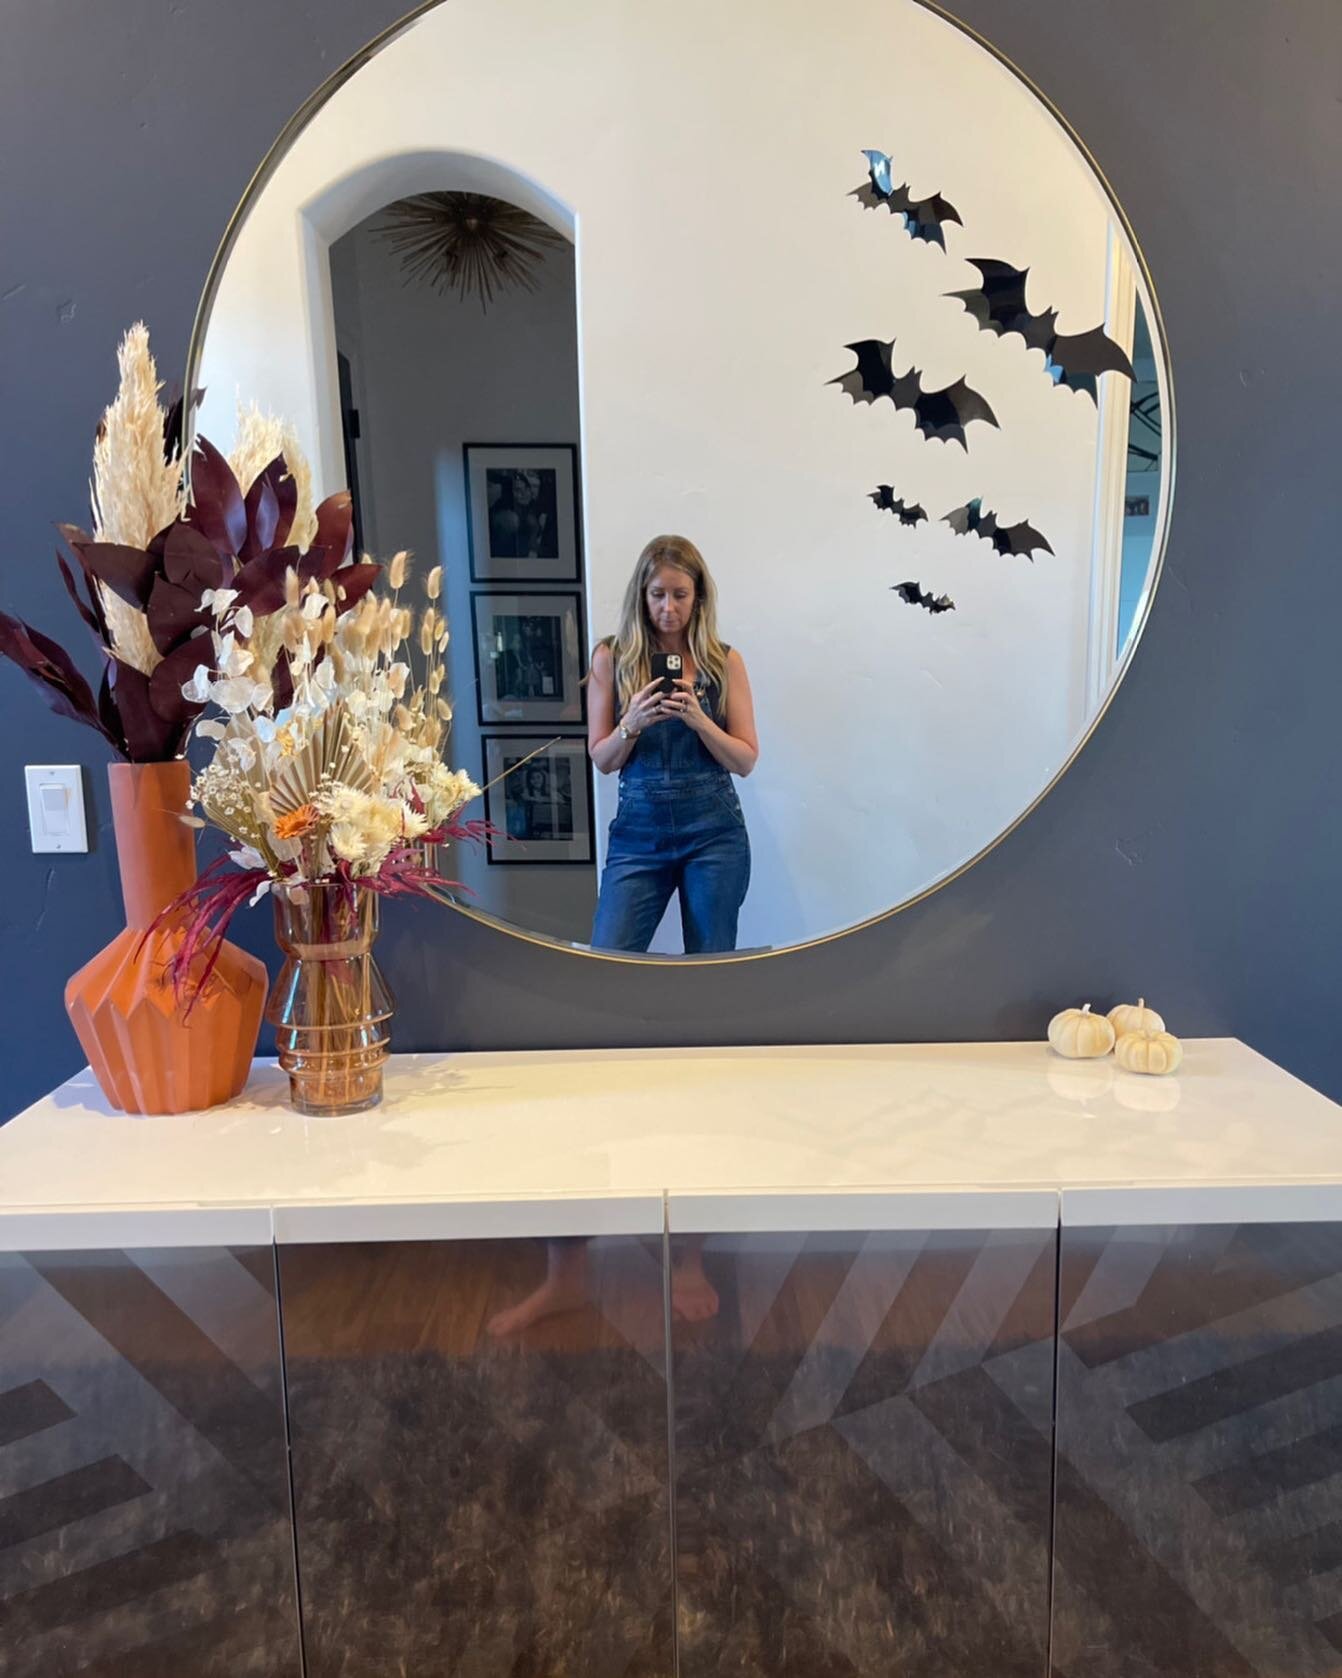 Can you believe it&rsquo;s October 🦇
Love this time of year! Yet every year it flys by&hellip;
.
.
#falldecor #falloutfits #fall #visiteldoradocounty #visiteldorado #interiordesigner #halloweendecor